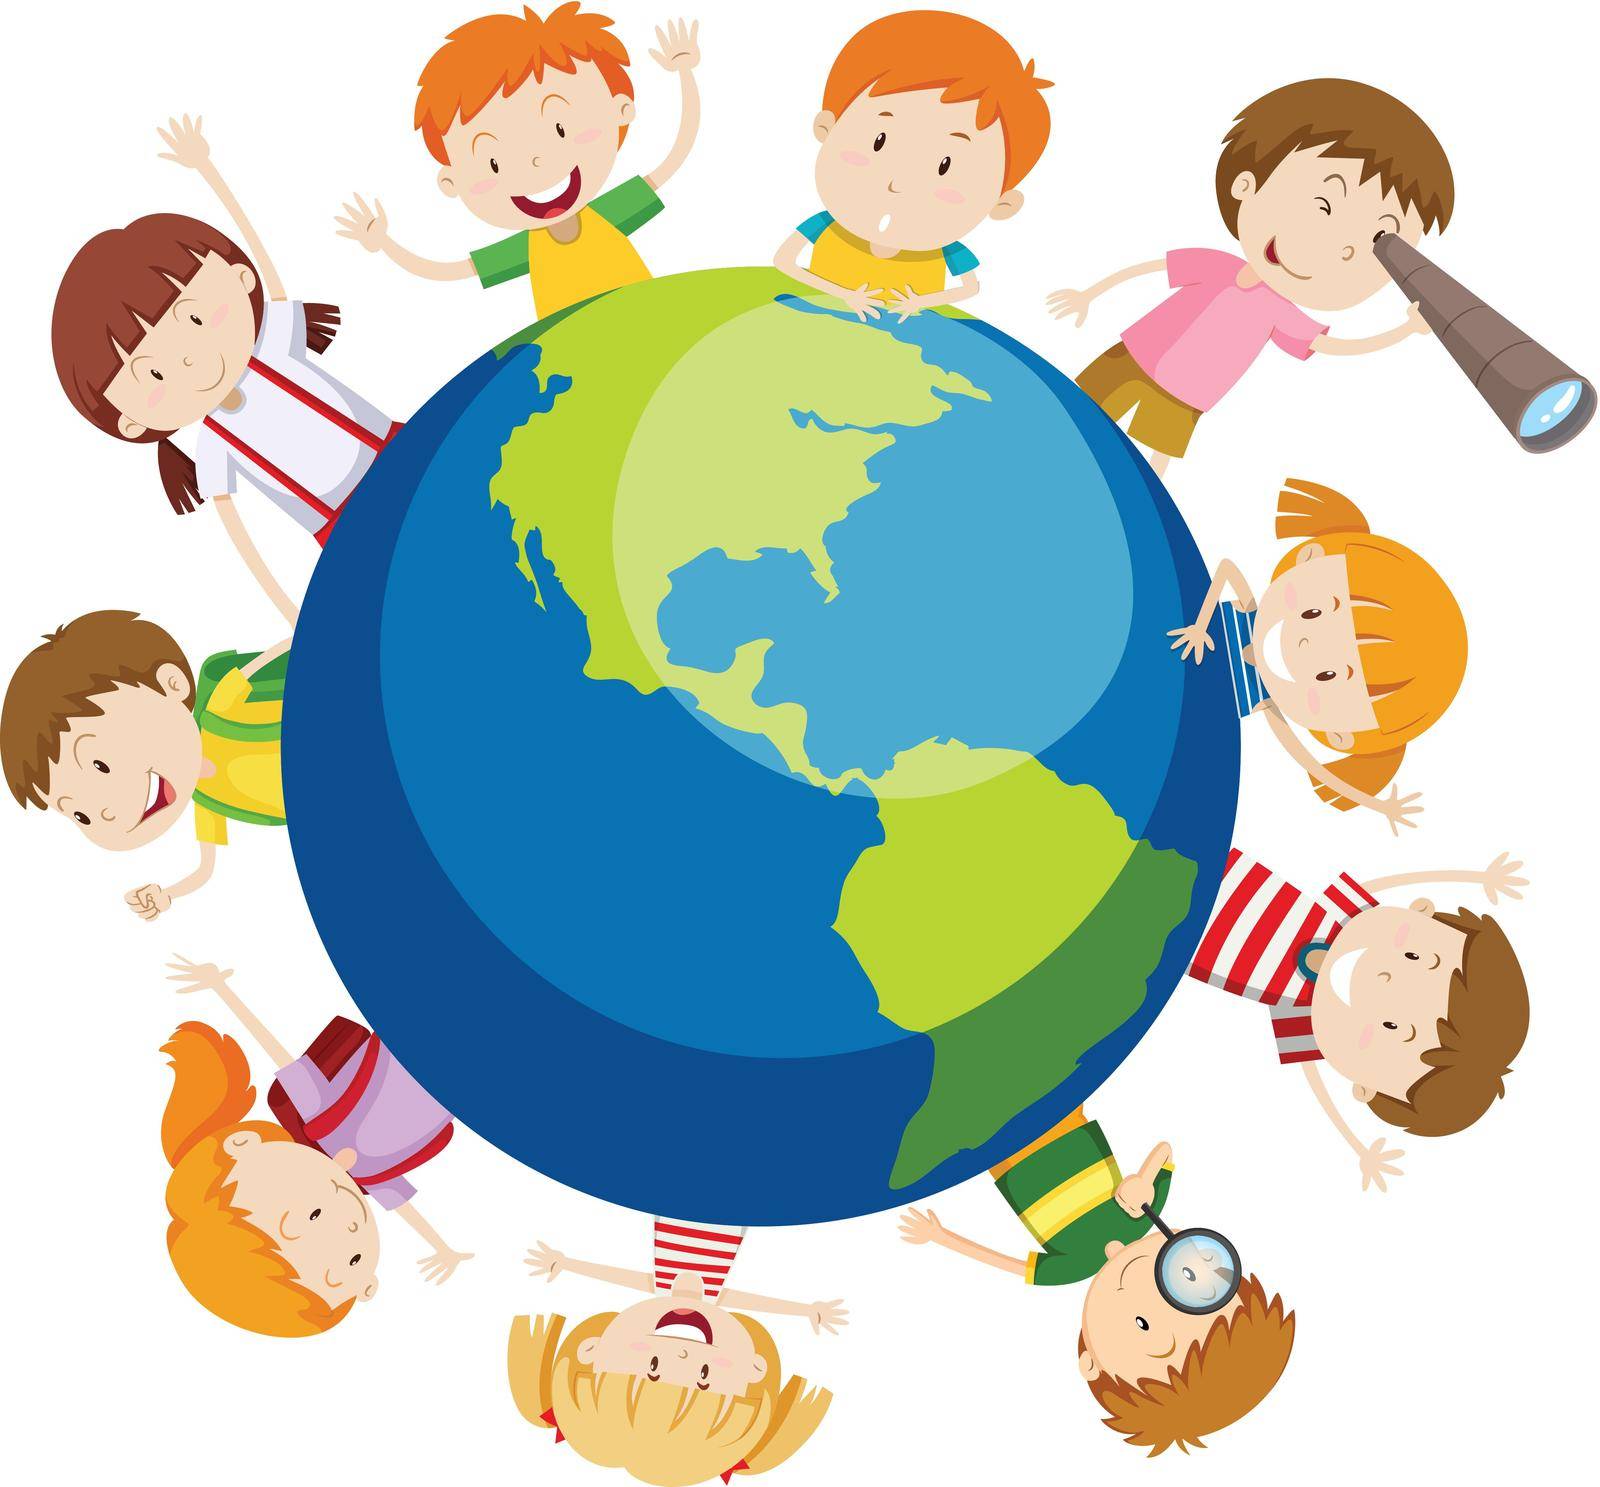 Children over the globe by iimages